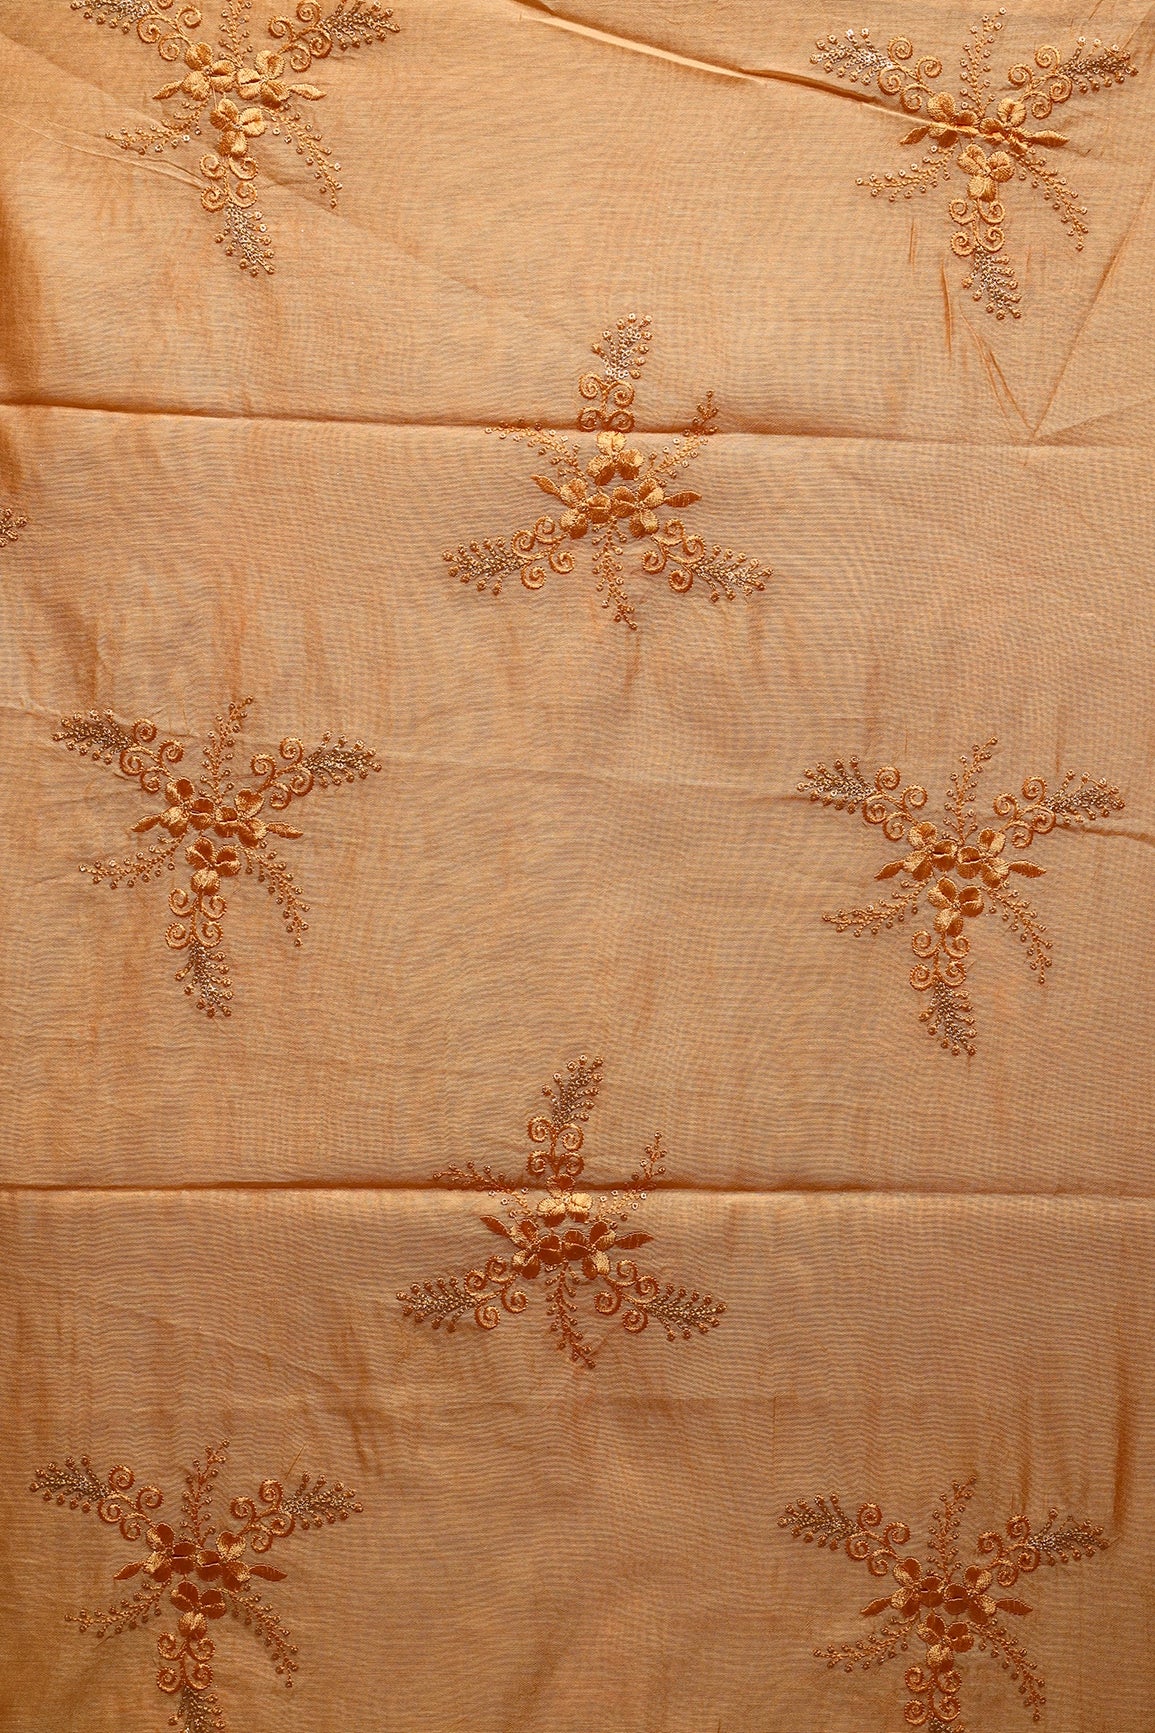 1.25 Meter Cut Piece Of Orange Thread With Gold Sequins Floral Embroidery On Orange Chanderi Fabric